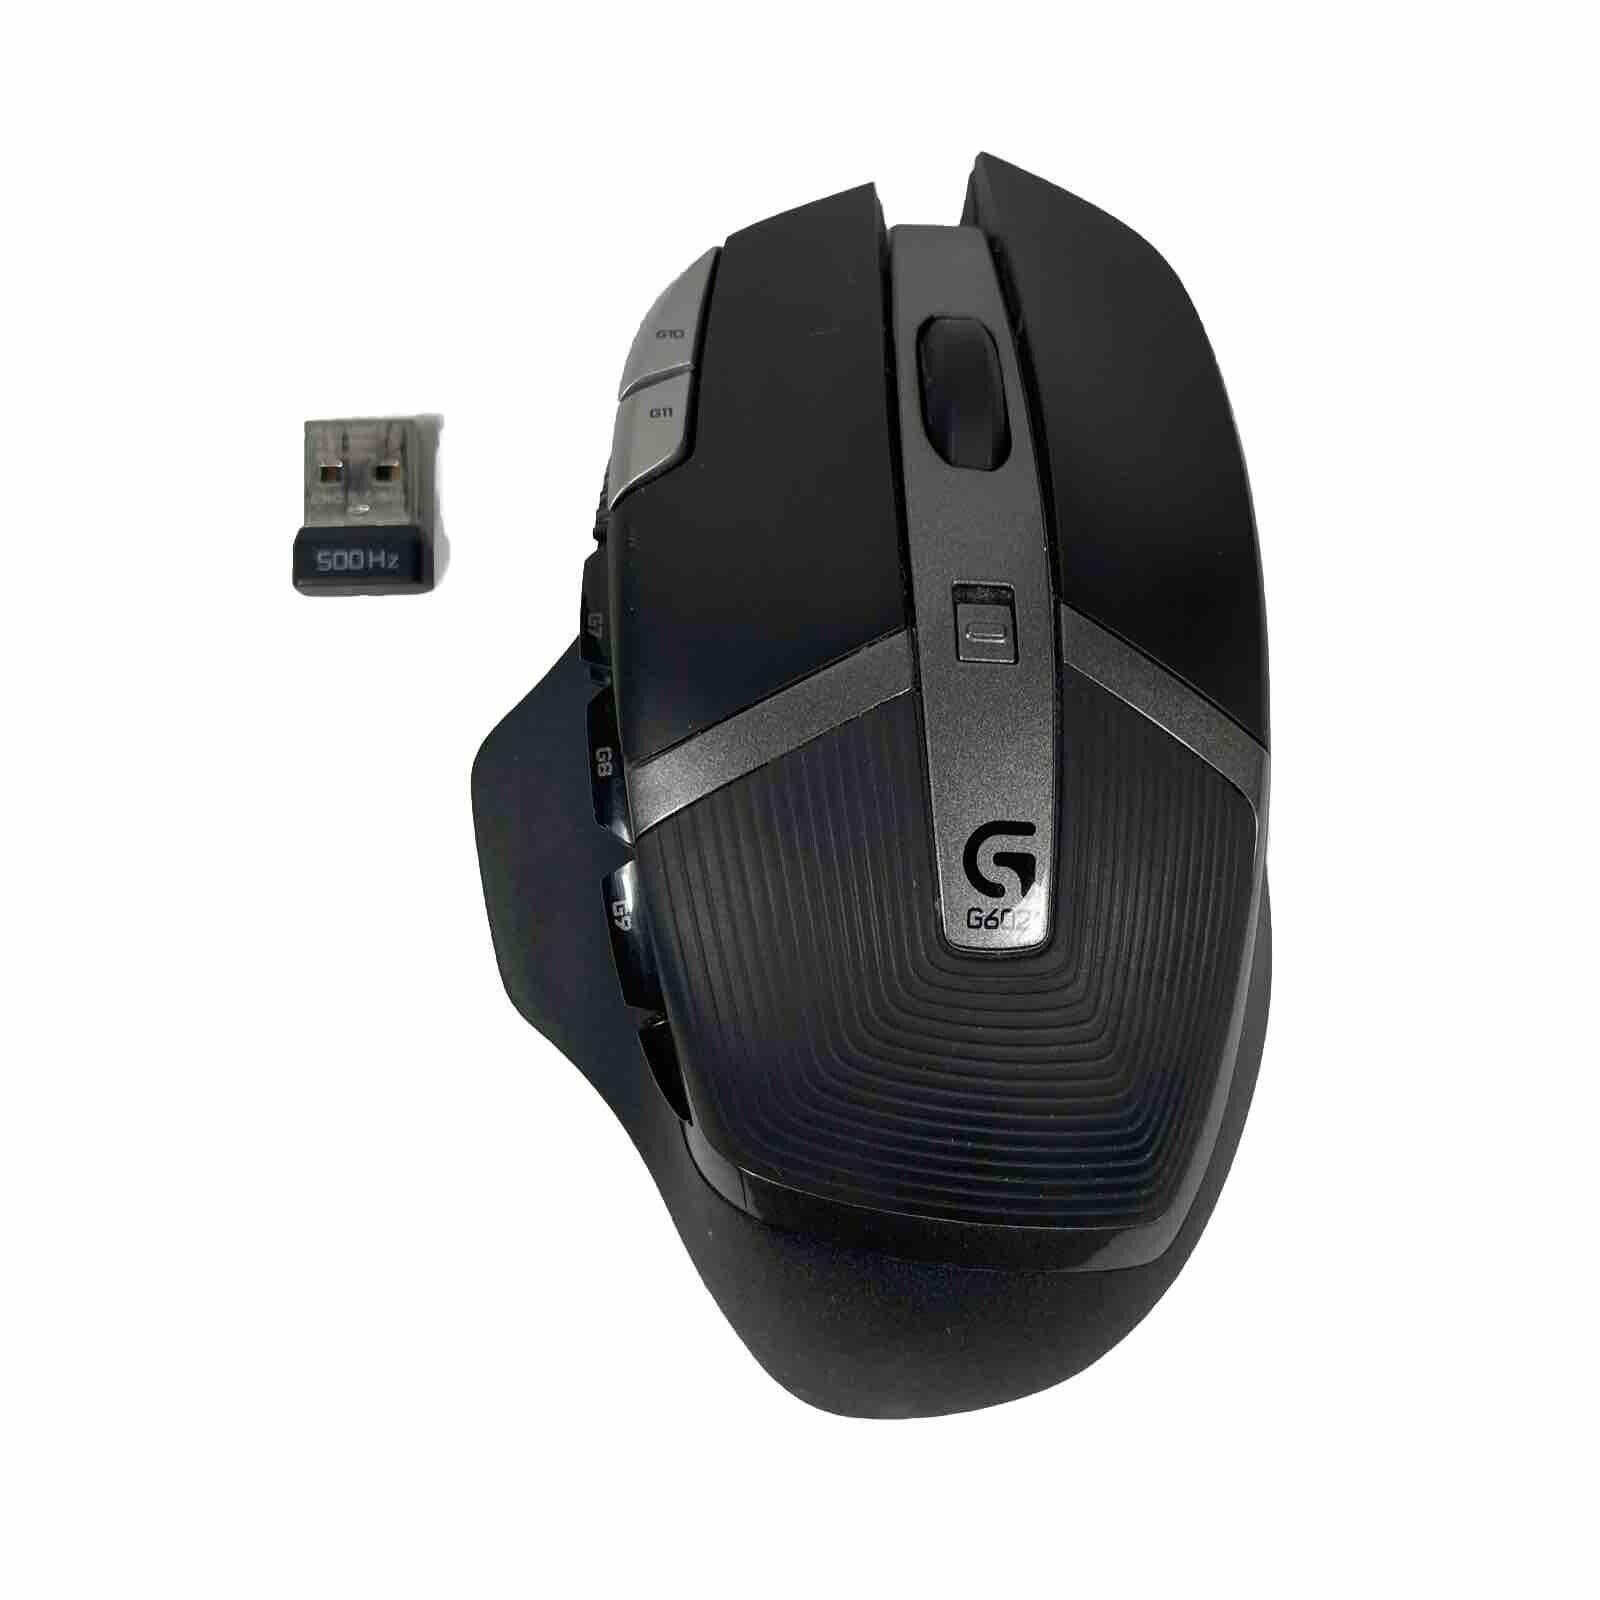 Logitech G602 Wireless Gaming Mouse + 500Mhz USB Receiver Dongle Tested/Working